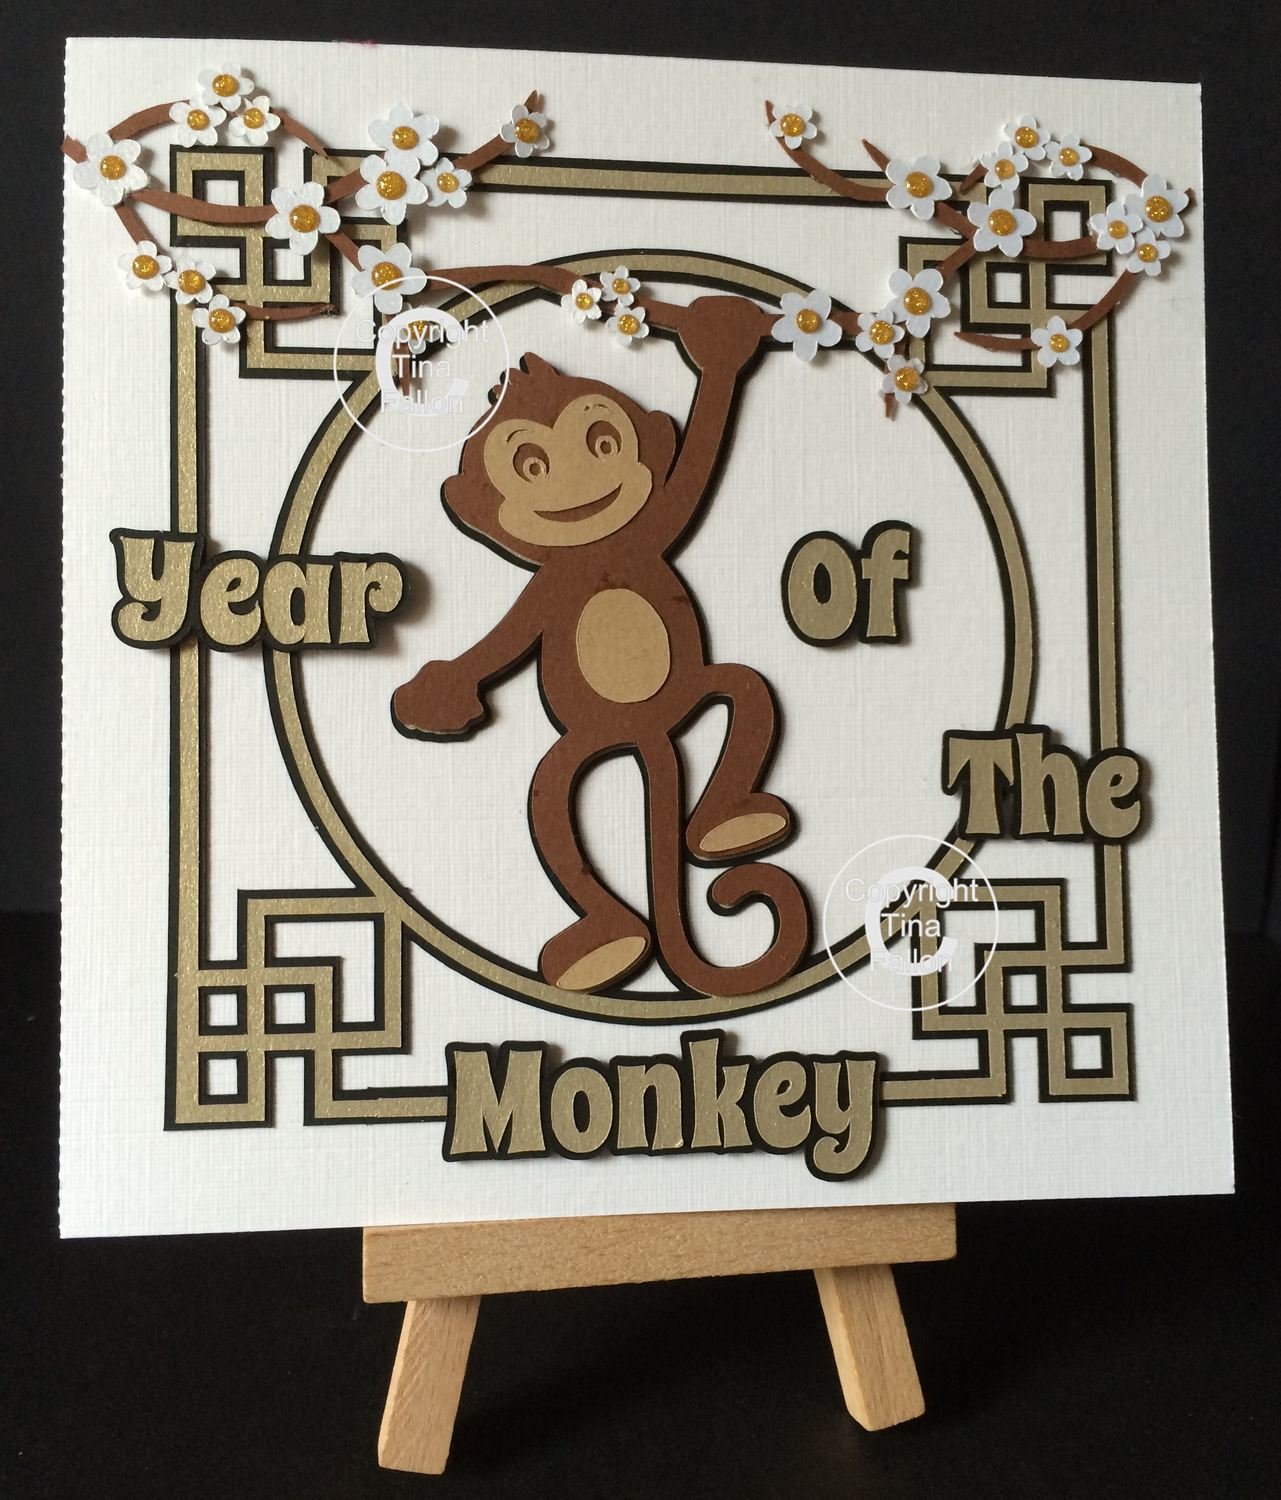 Chinese New Year Card - design 6 Lunar Year of The Monkey